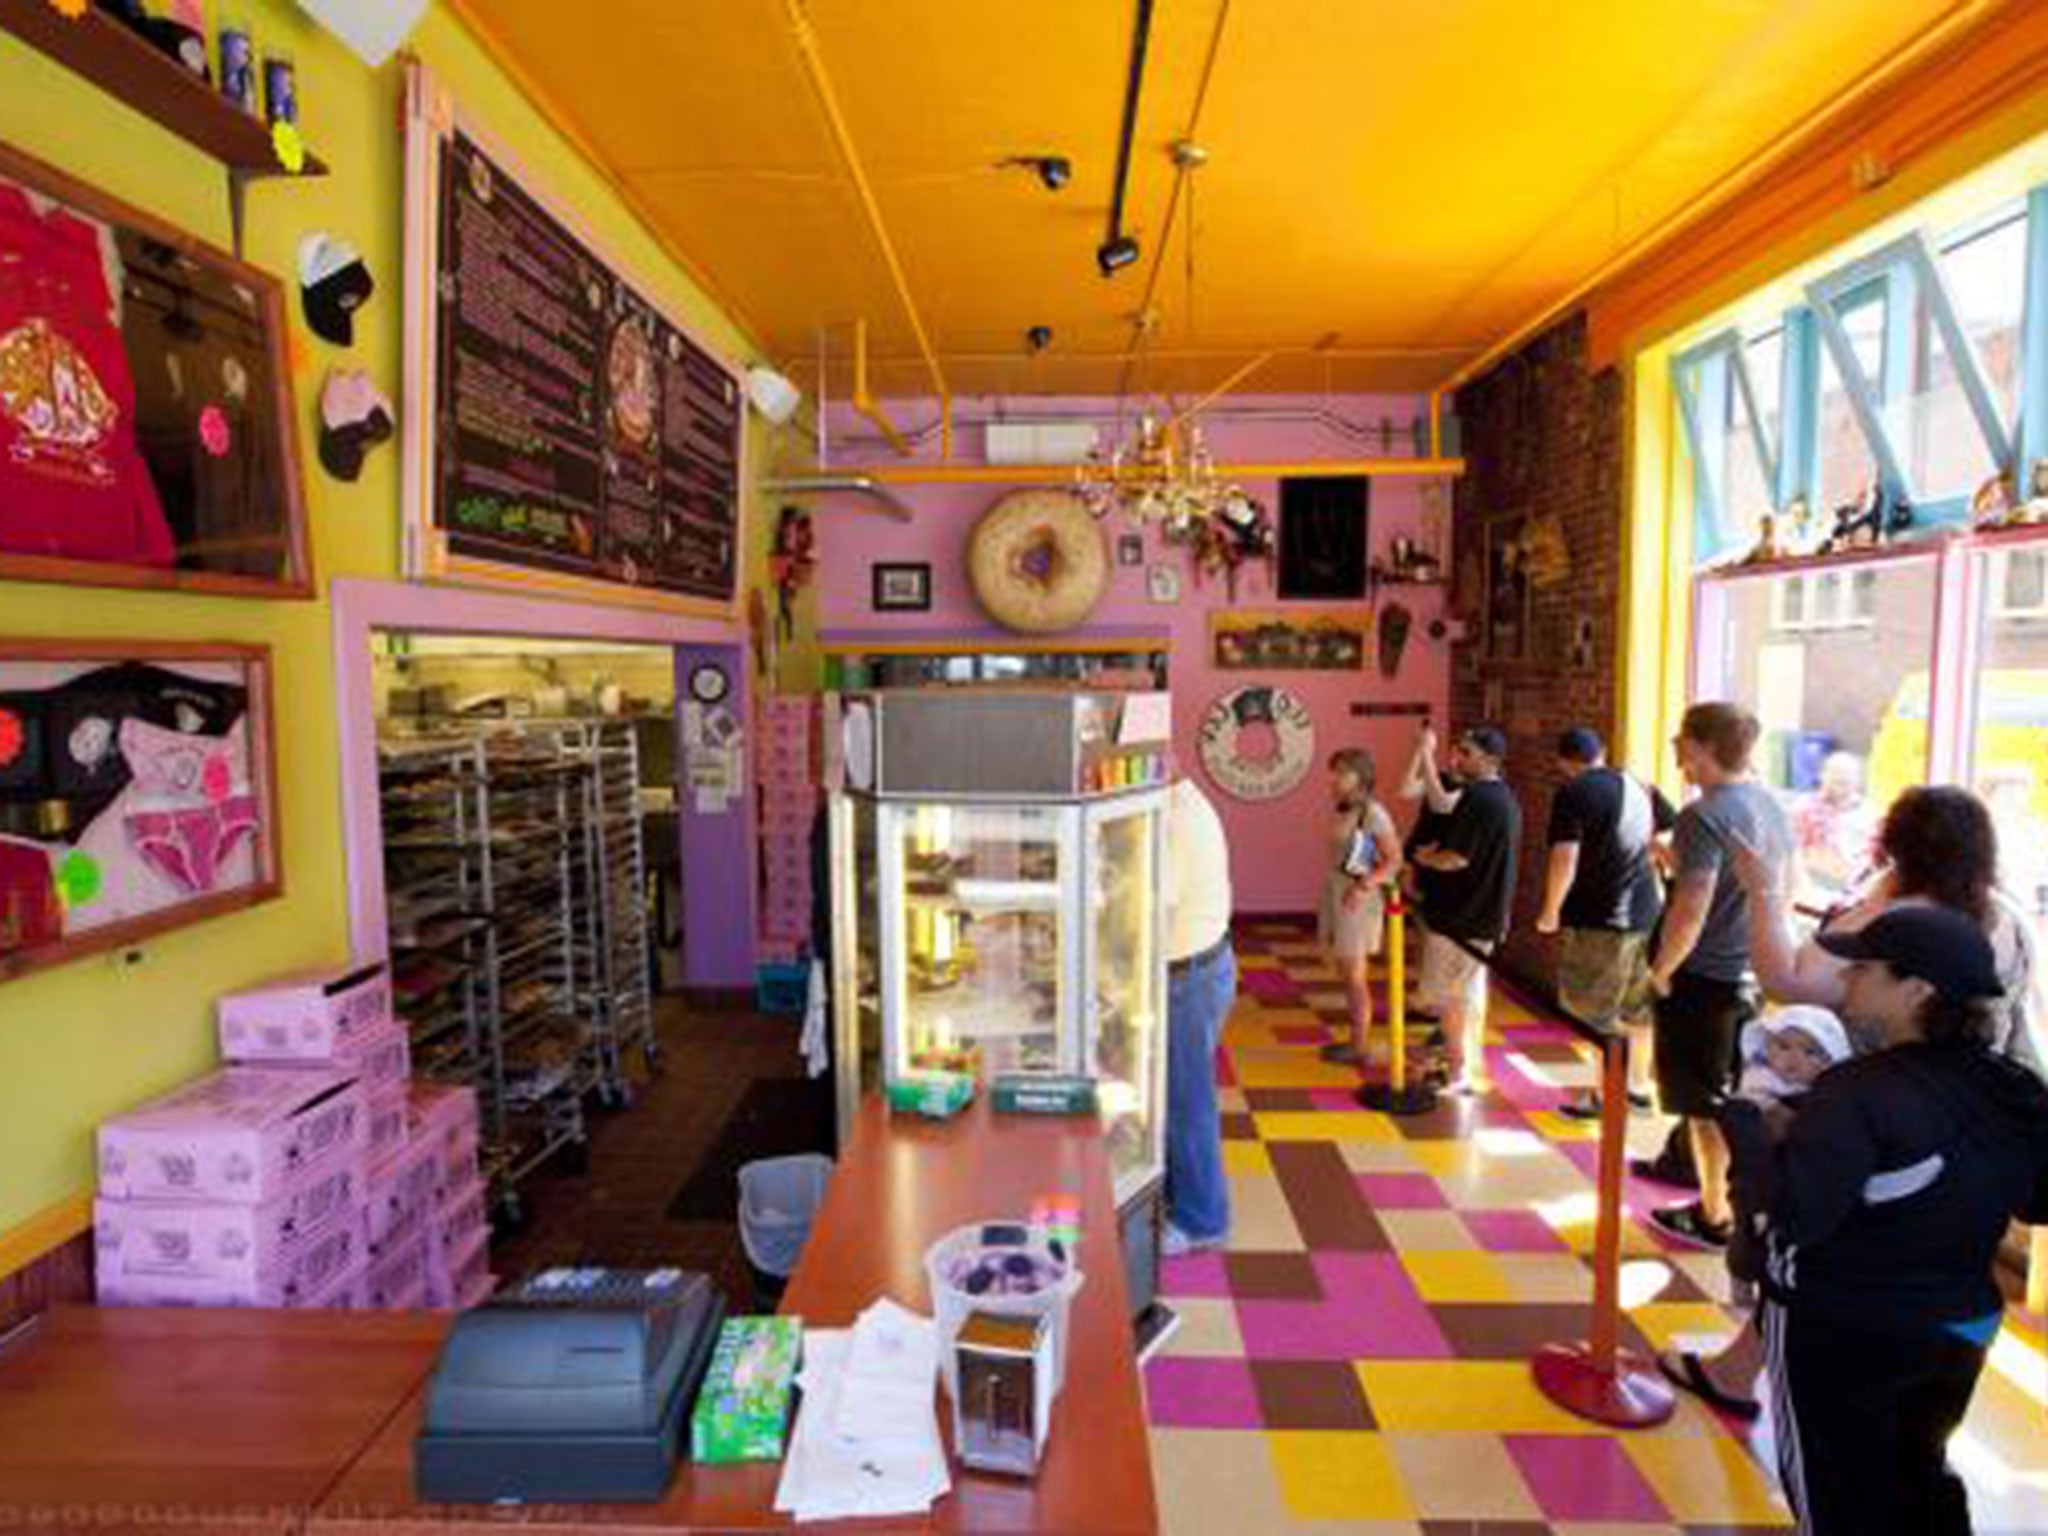 Voodoo Doughnut is famous for outlandish snacks including the Voodoo Doll Doughnut and the Maple Bacon Bar